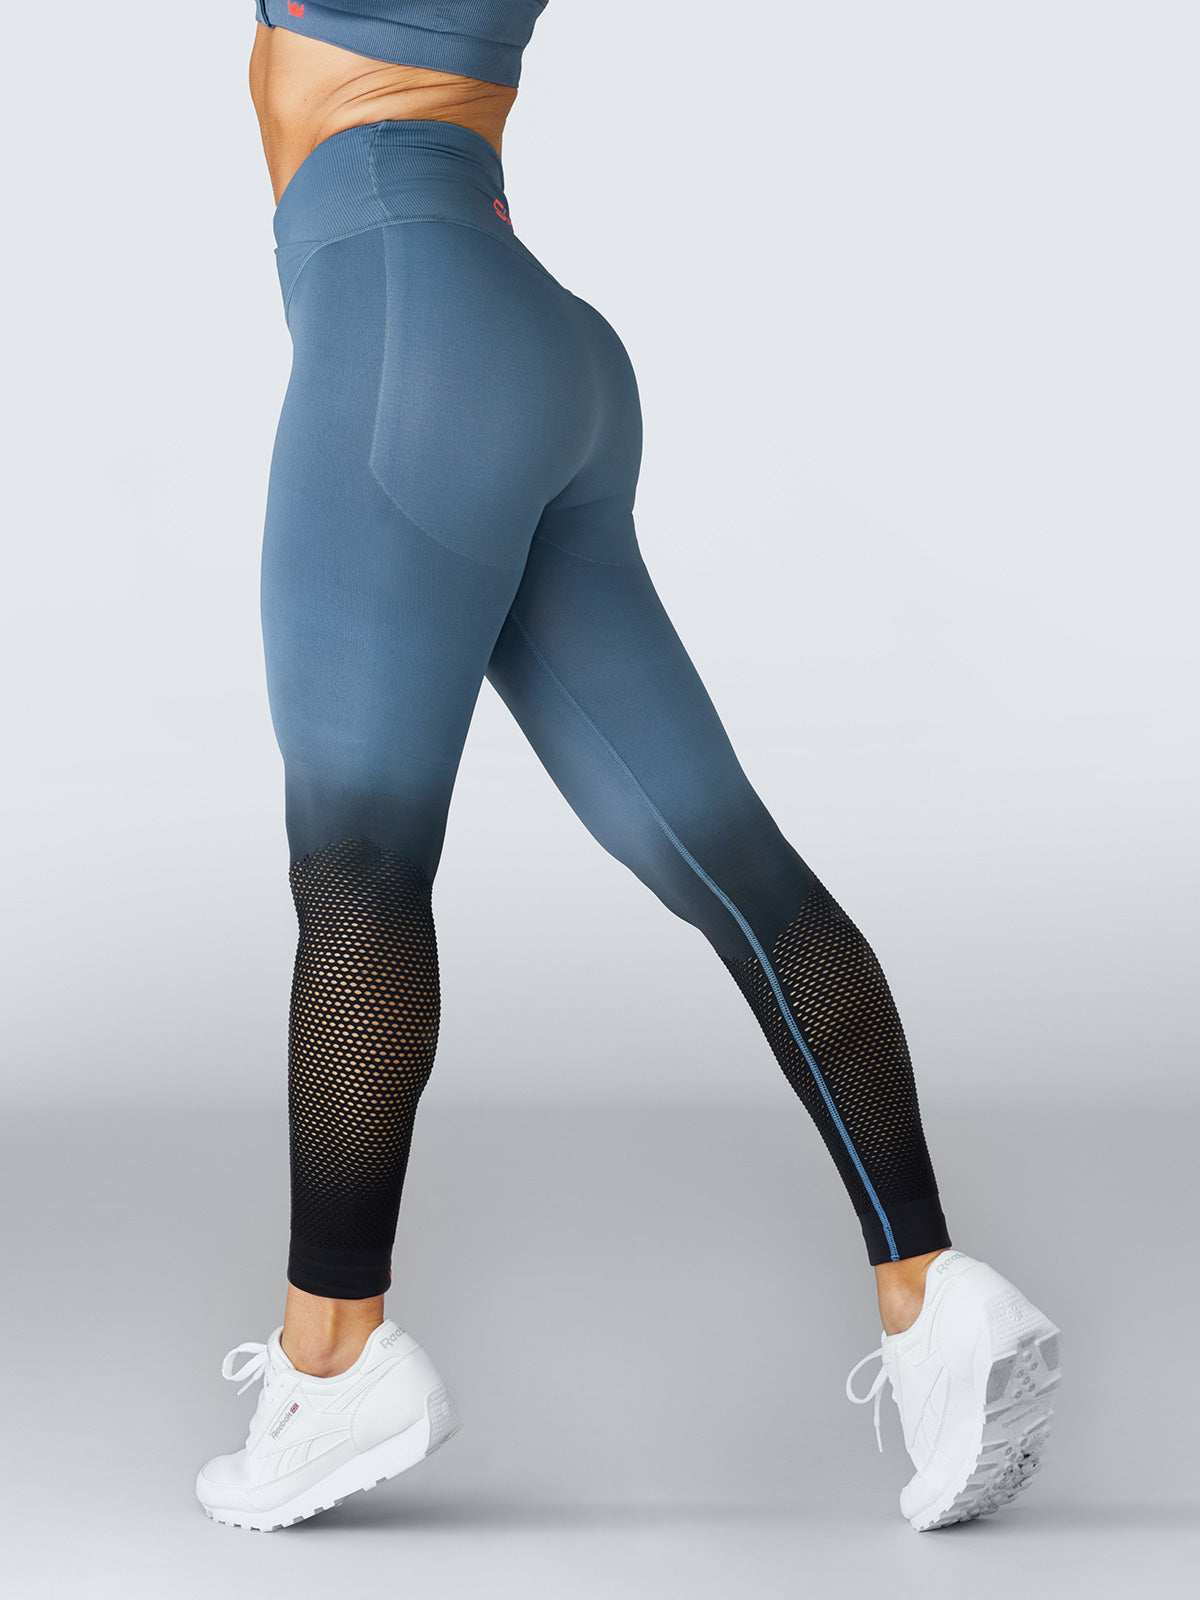 Seamless Leggings - Washed Denim Ombre